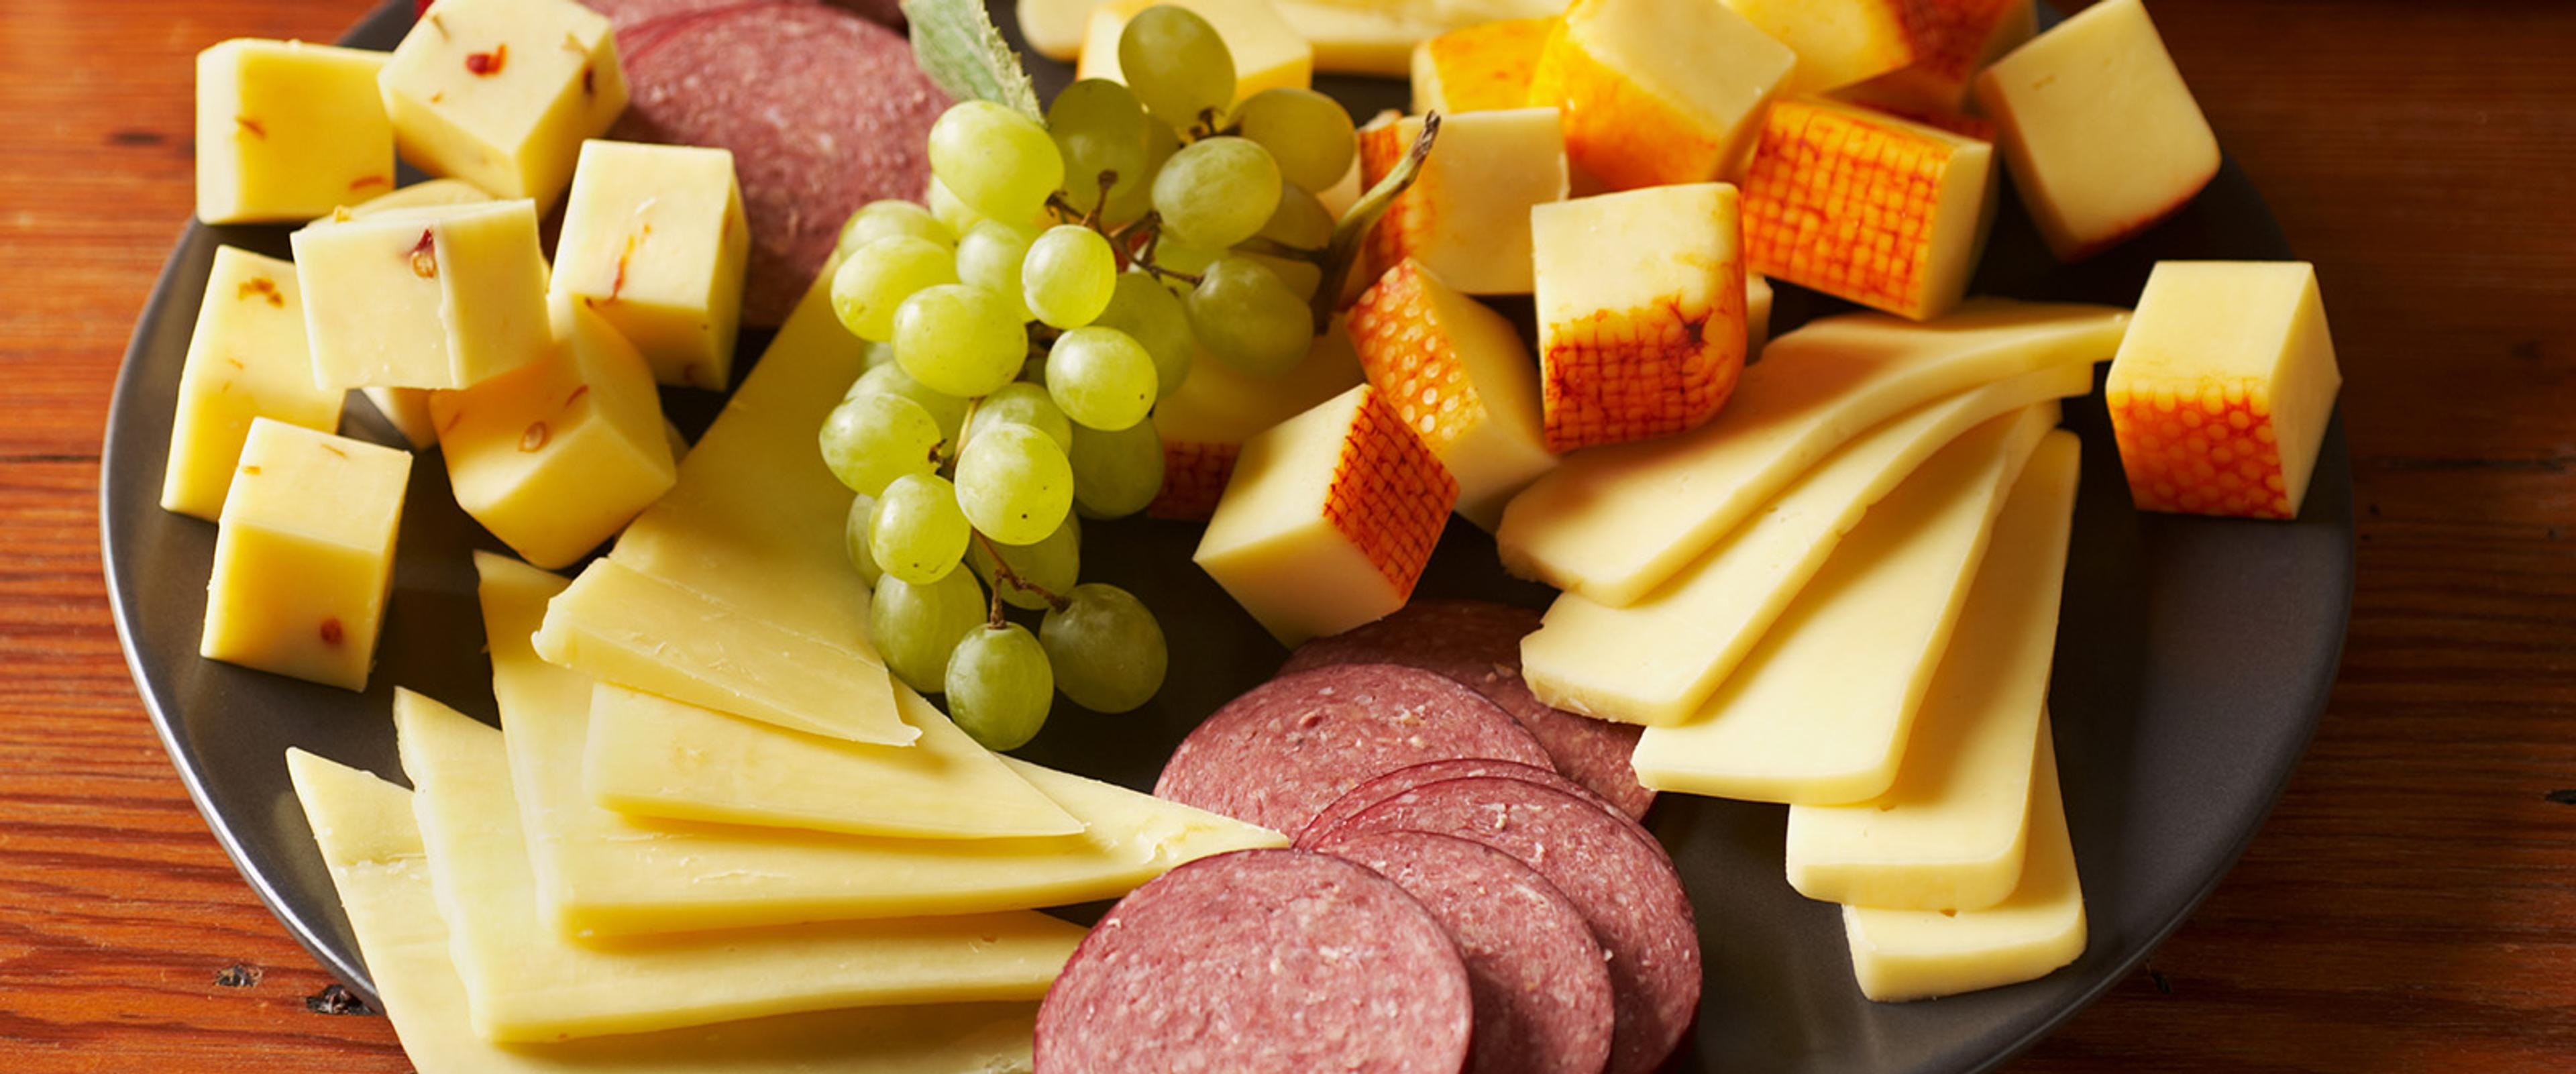 A tray of cheese, sausage, and grapes